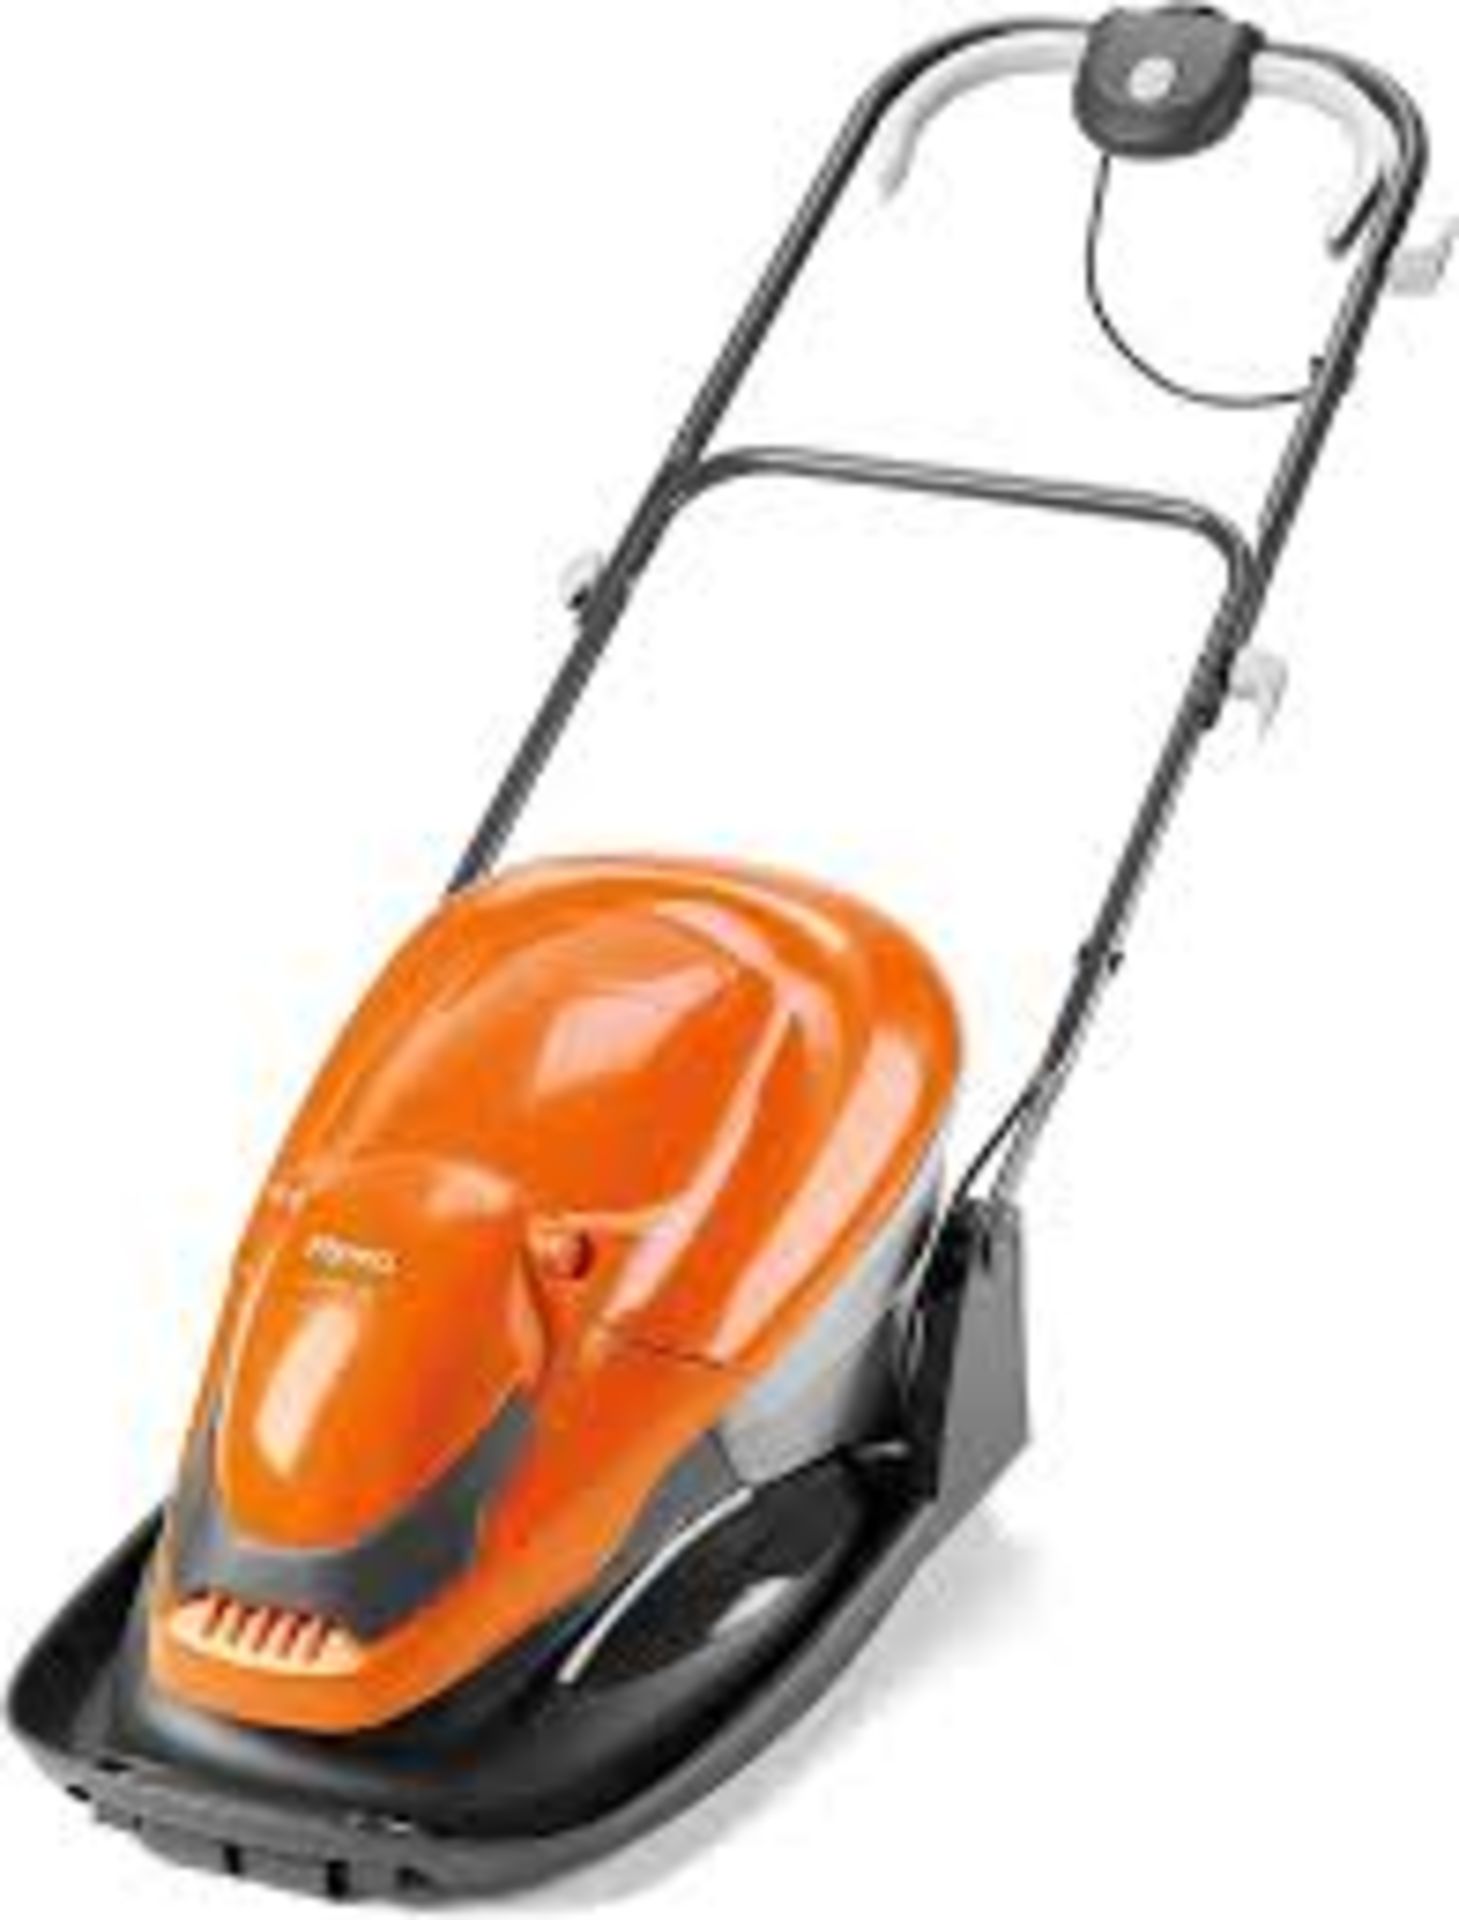 Flymo EasiGlide 300 Hover Collect Lawn Mower - 1700W Motor. - S2.10.